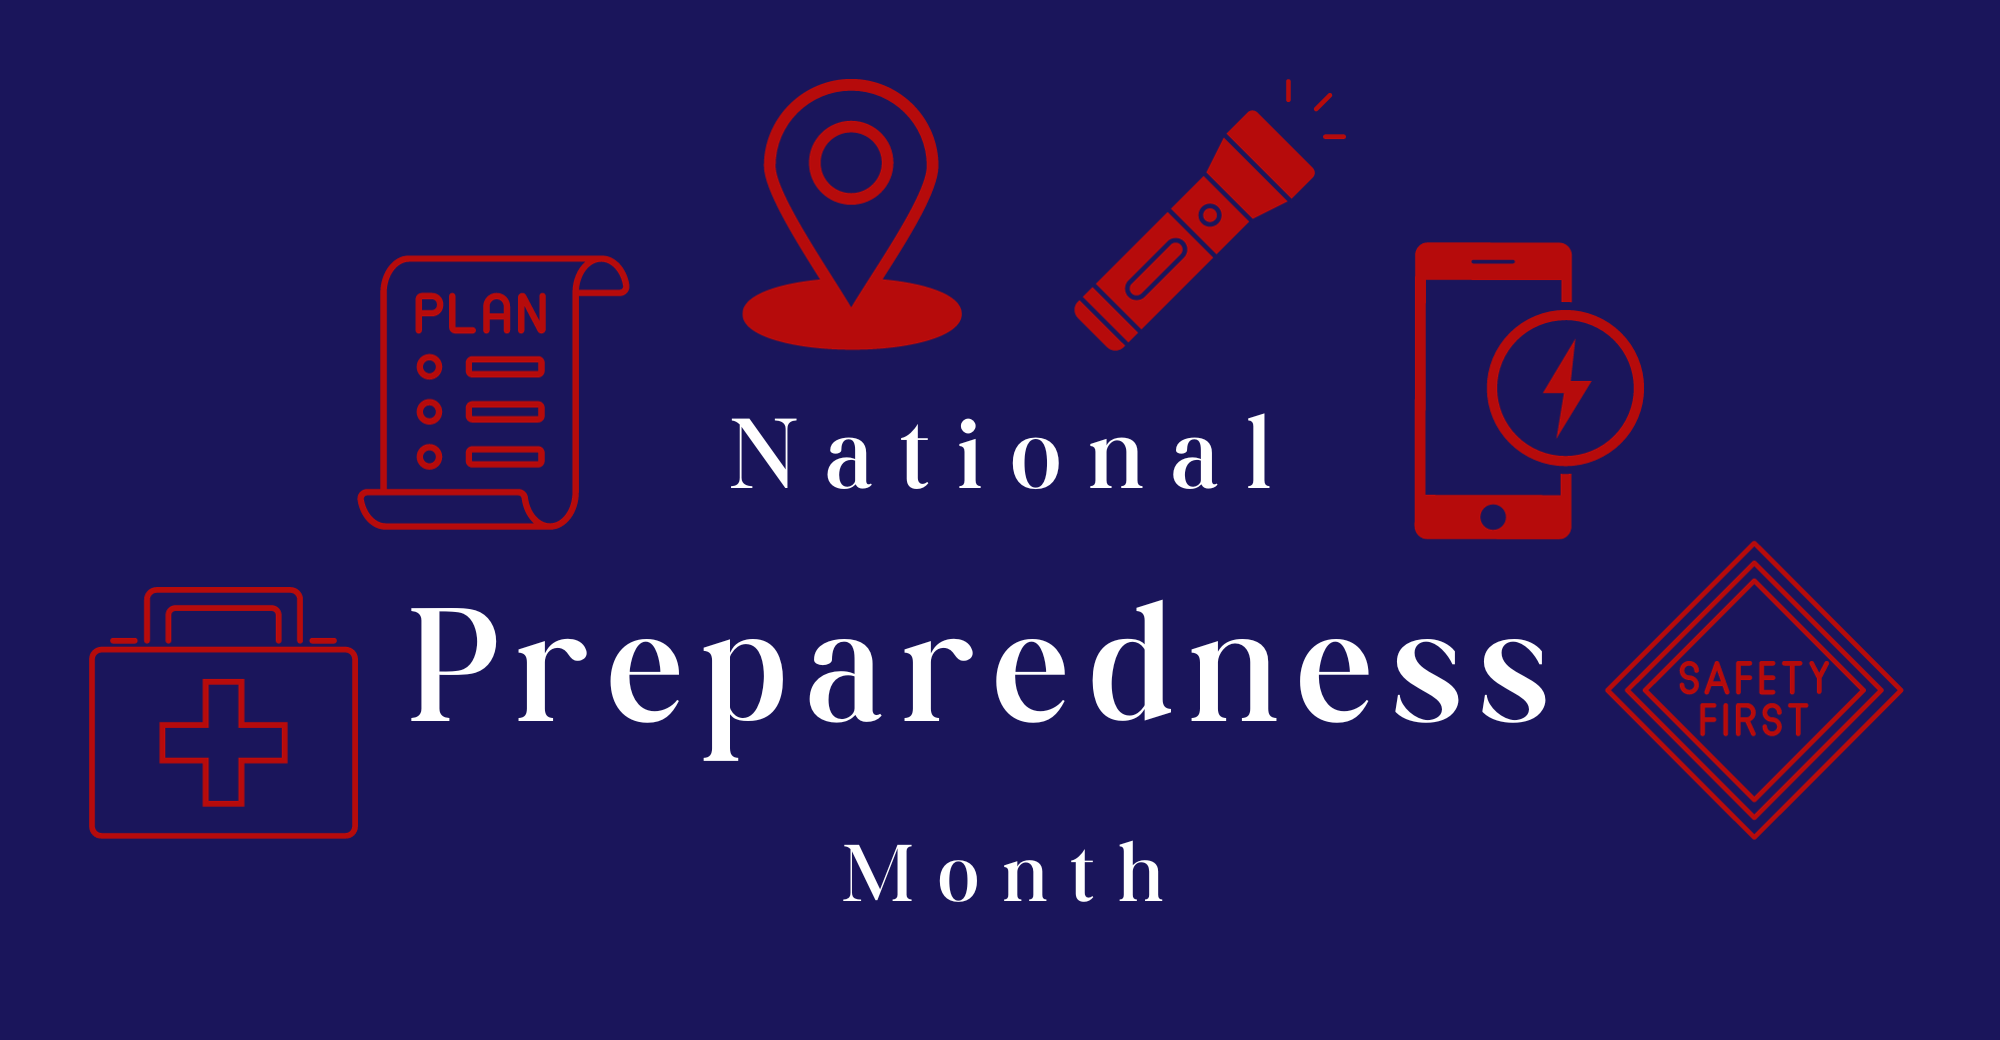 Celebrate National Preparedness Month by learning ways to be prepared